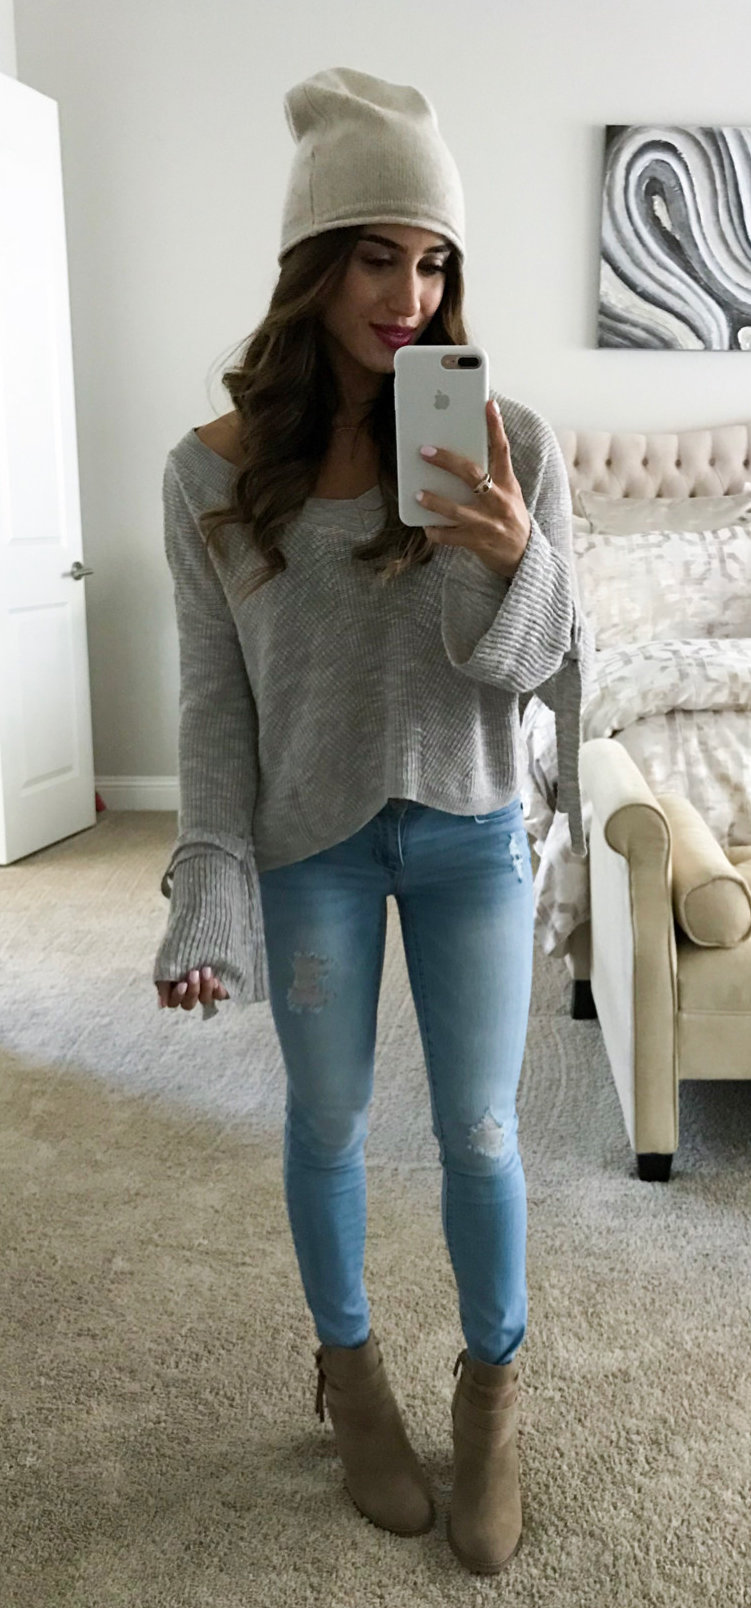 women's gray sweatshirt, gray hat, and blue-washed jeans